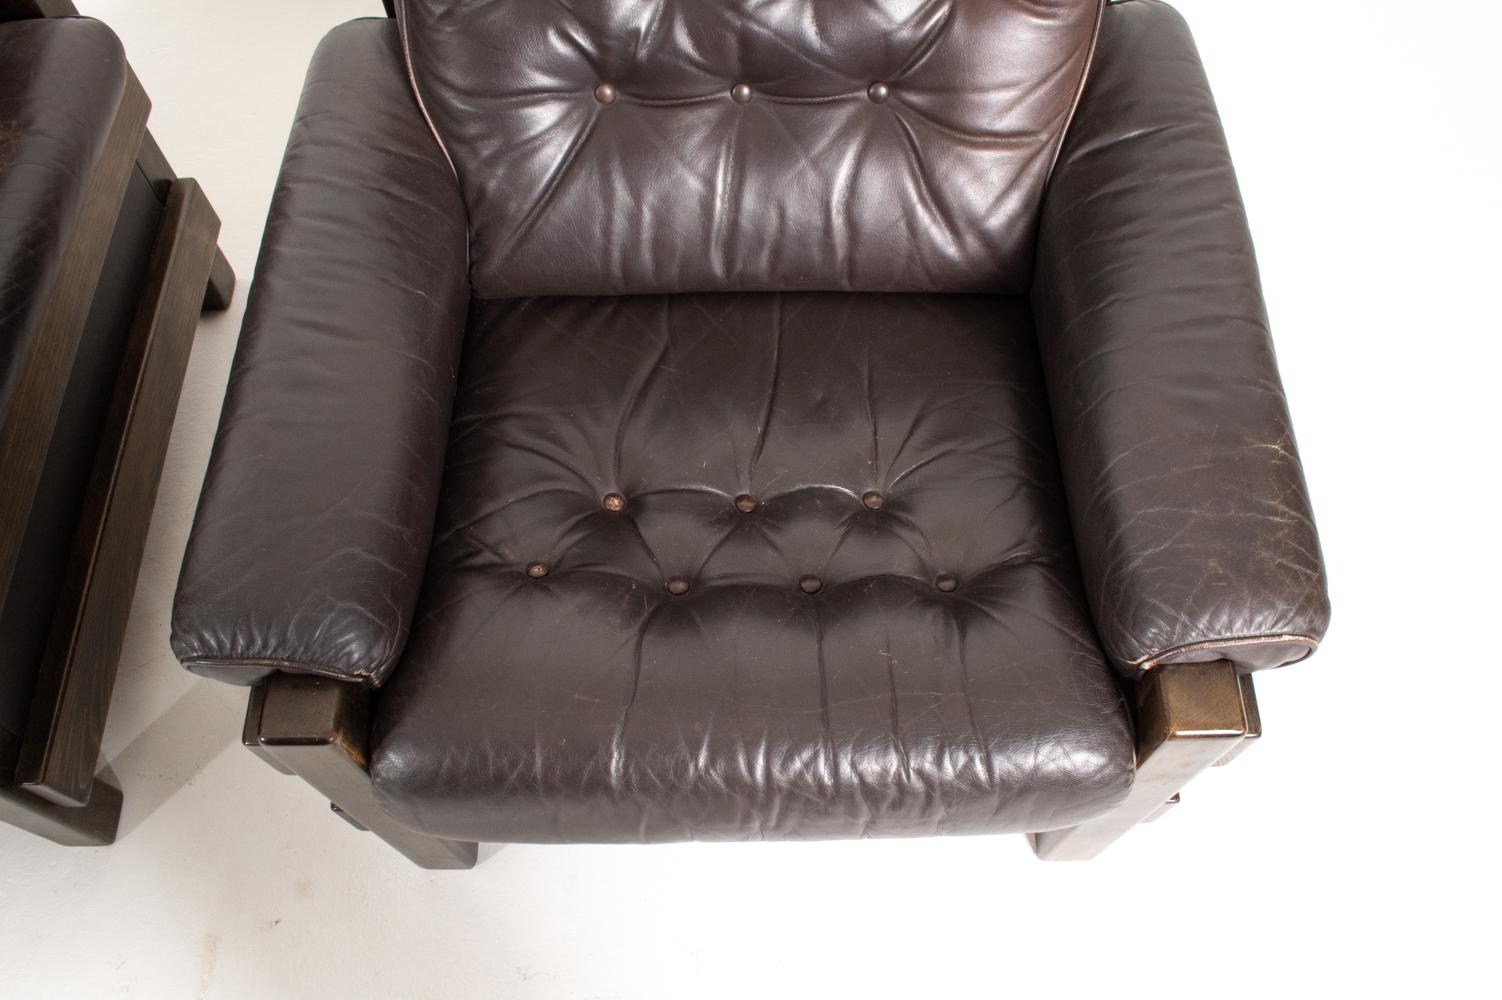 Pair of Swedish Mid-Century Tufted Leather Lounge Chairs by Ikea, 1970's In Good Condition For Sale In Norwalk, CT